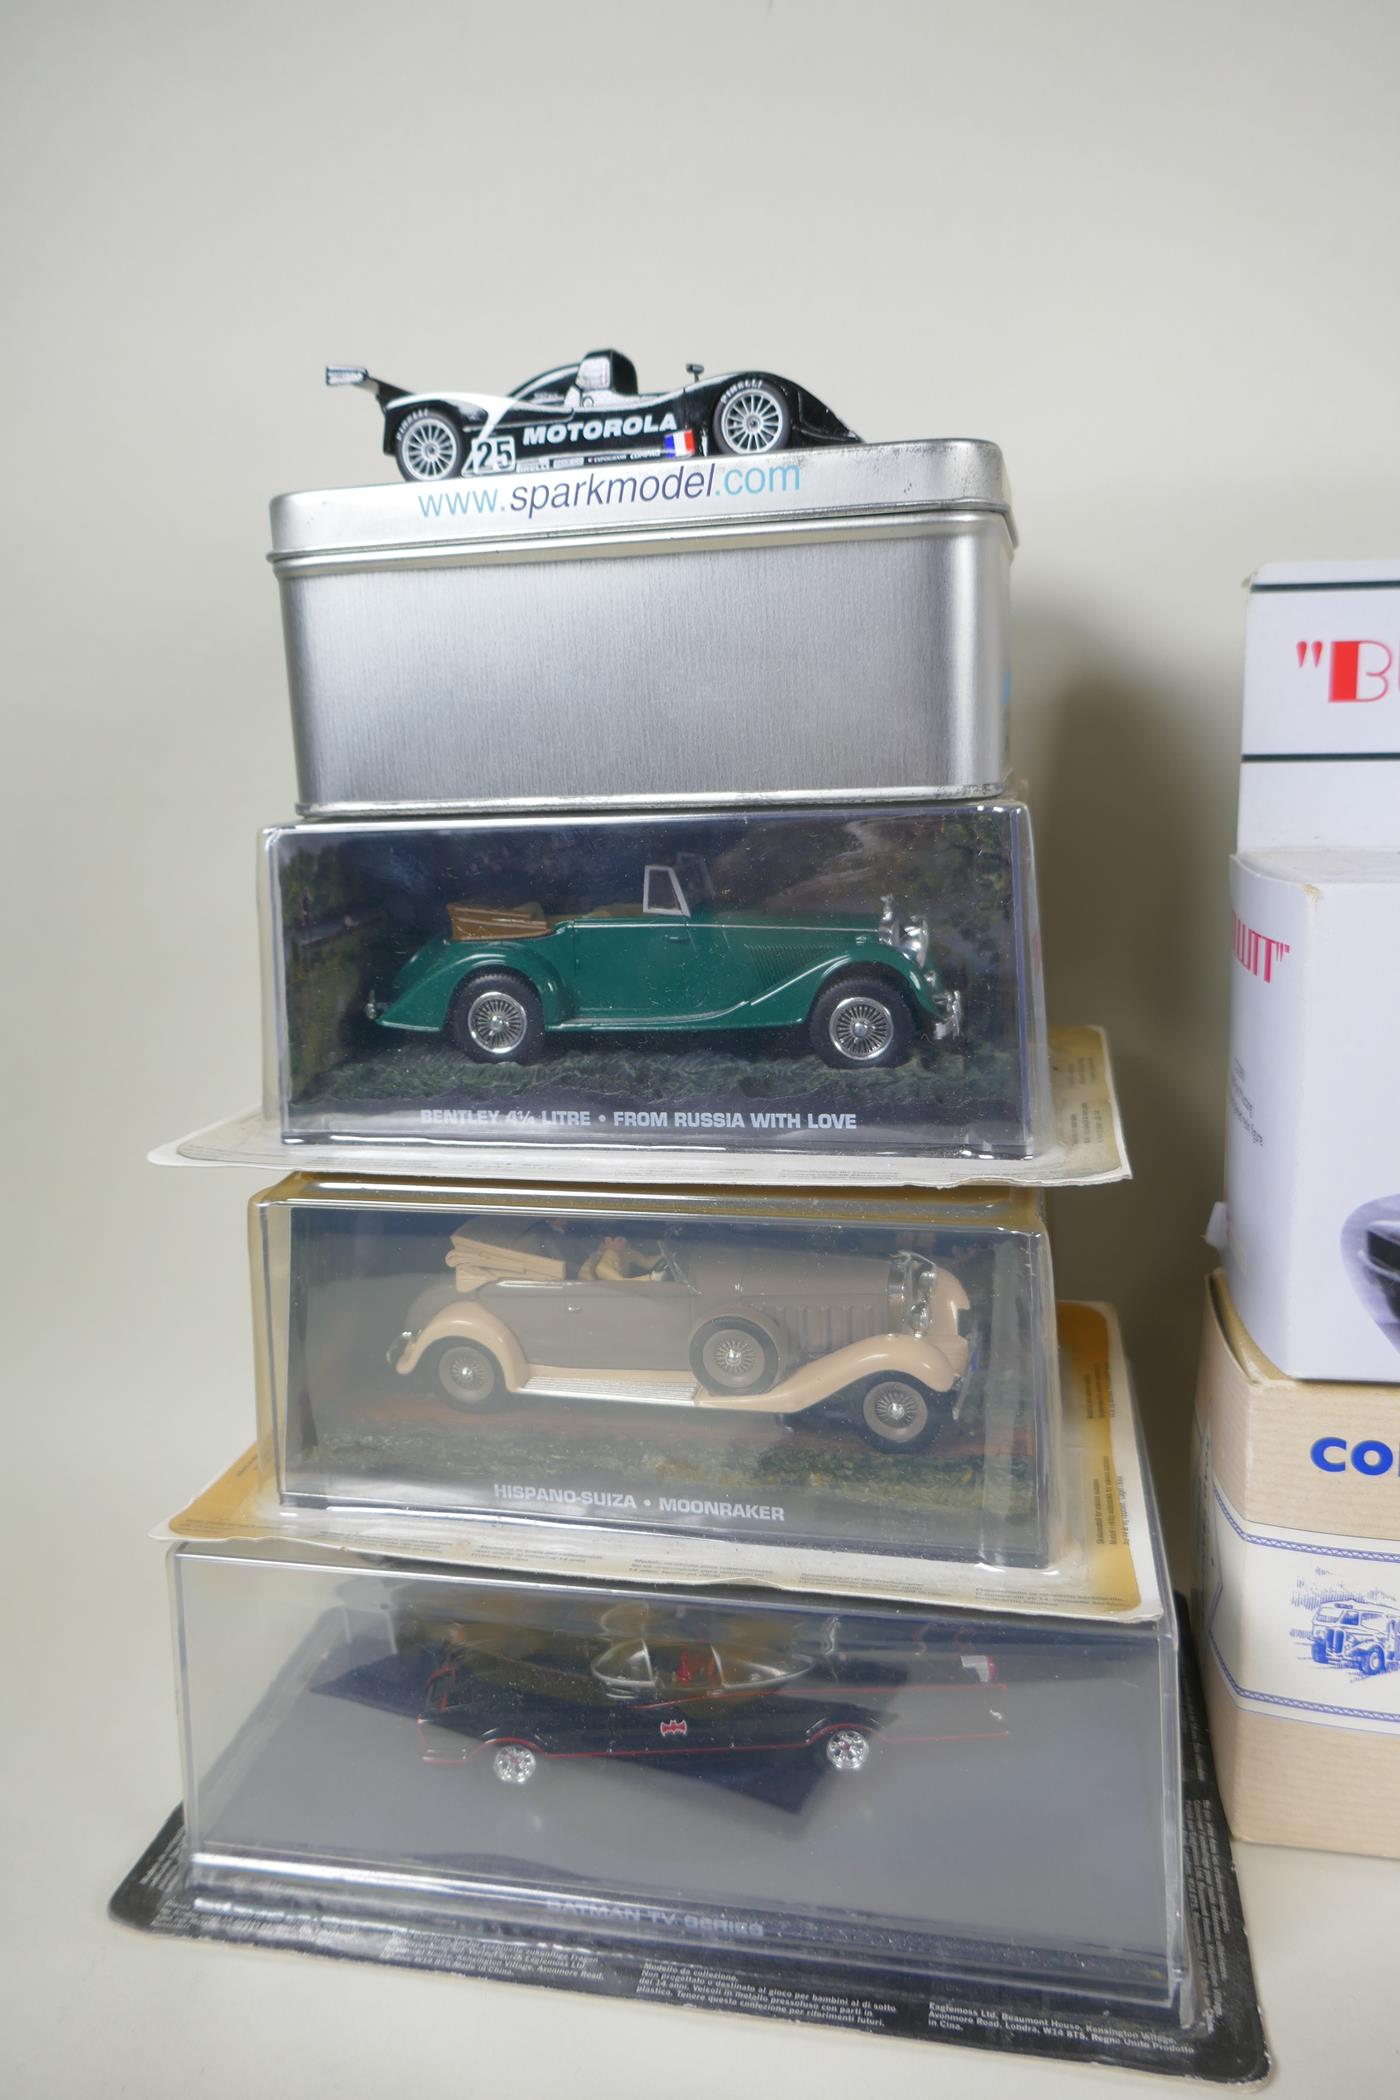 A quantity of 1:43 scale die cast model cars by various manufacturers including Solido, Corgi, - Image 6 of 9